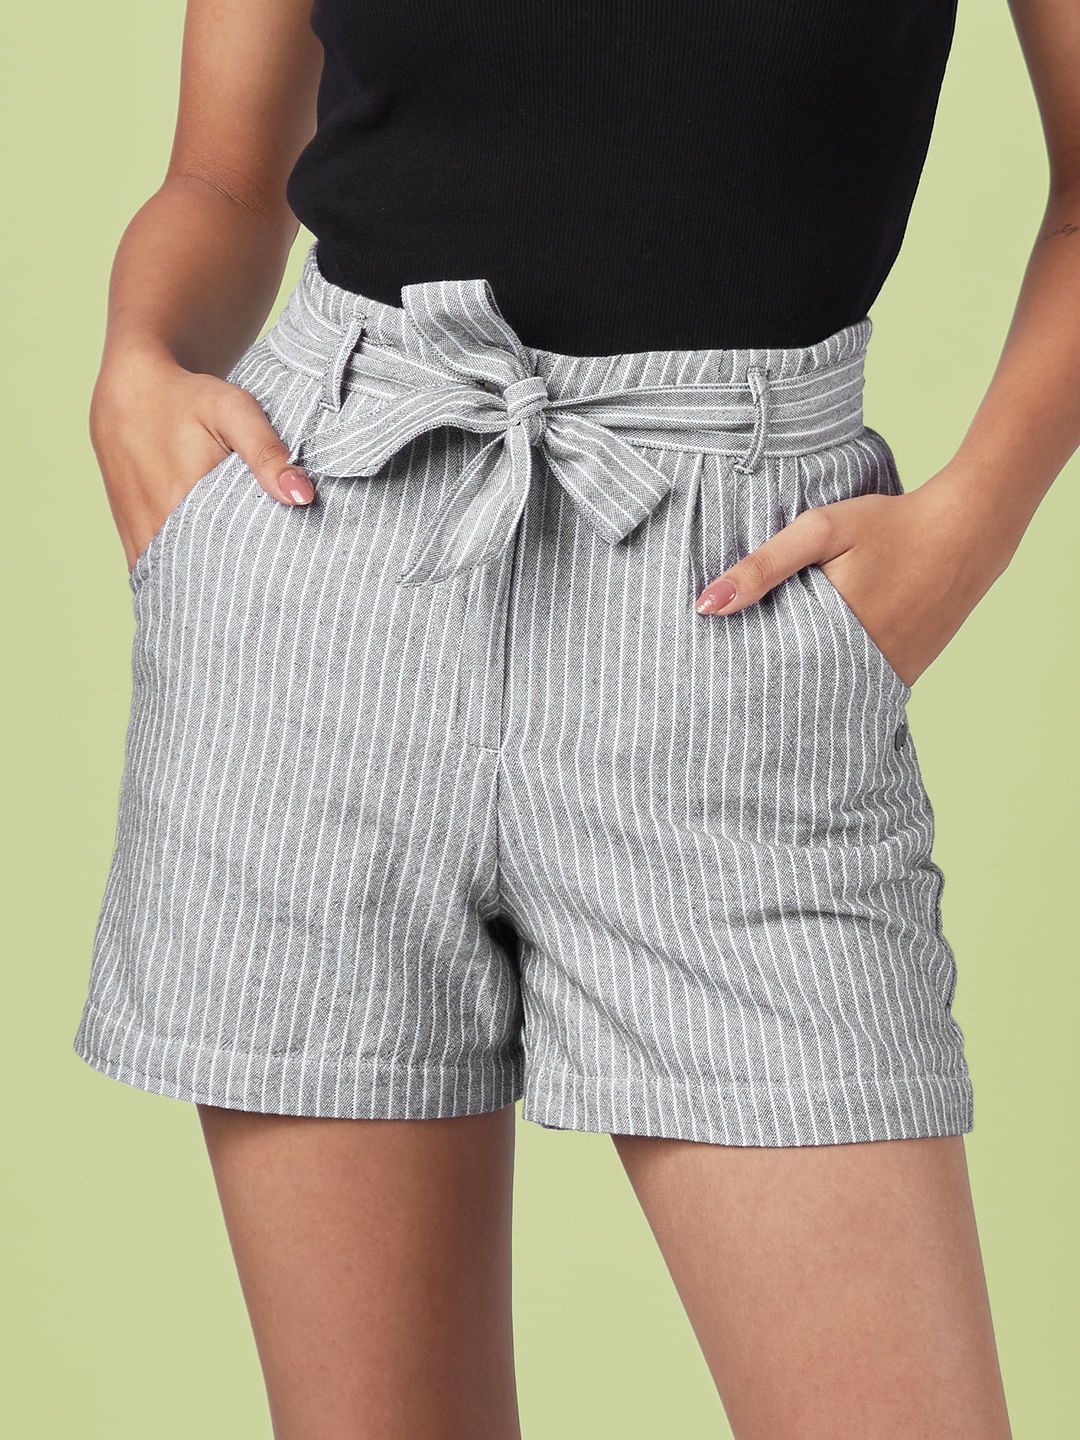 Women's Shorts - Buy Ladies Shorts & Hot Pants Online at The Souled Store